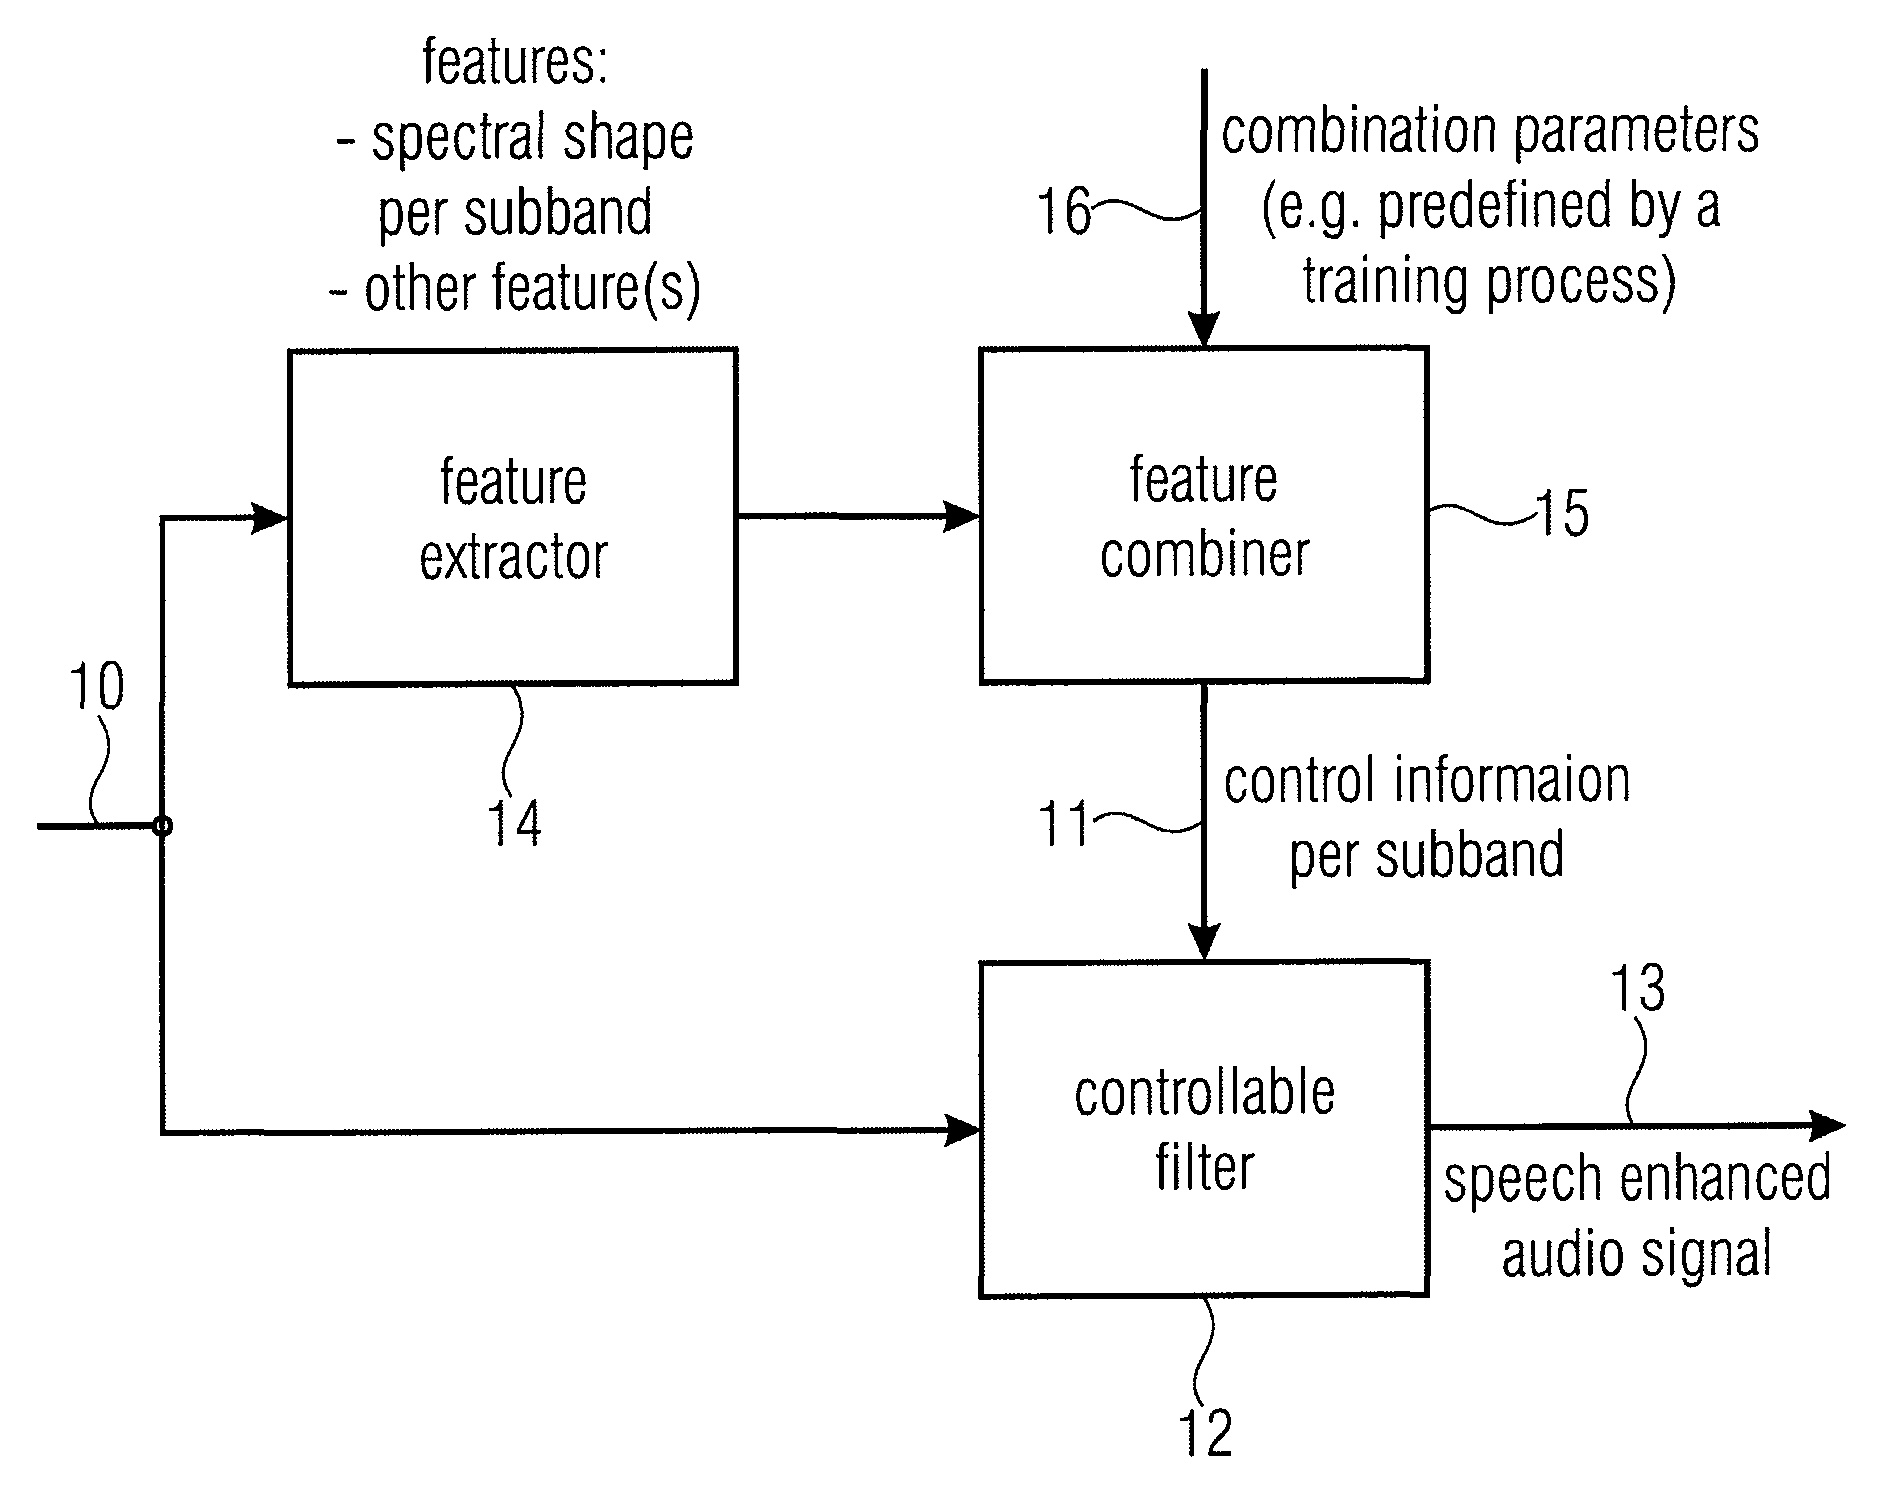 Apparatus and method for processing an audio signal for speech enhancement using a feature extraction